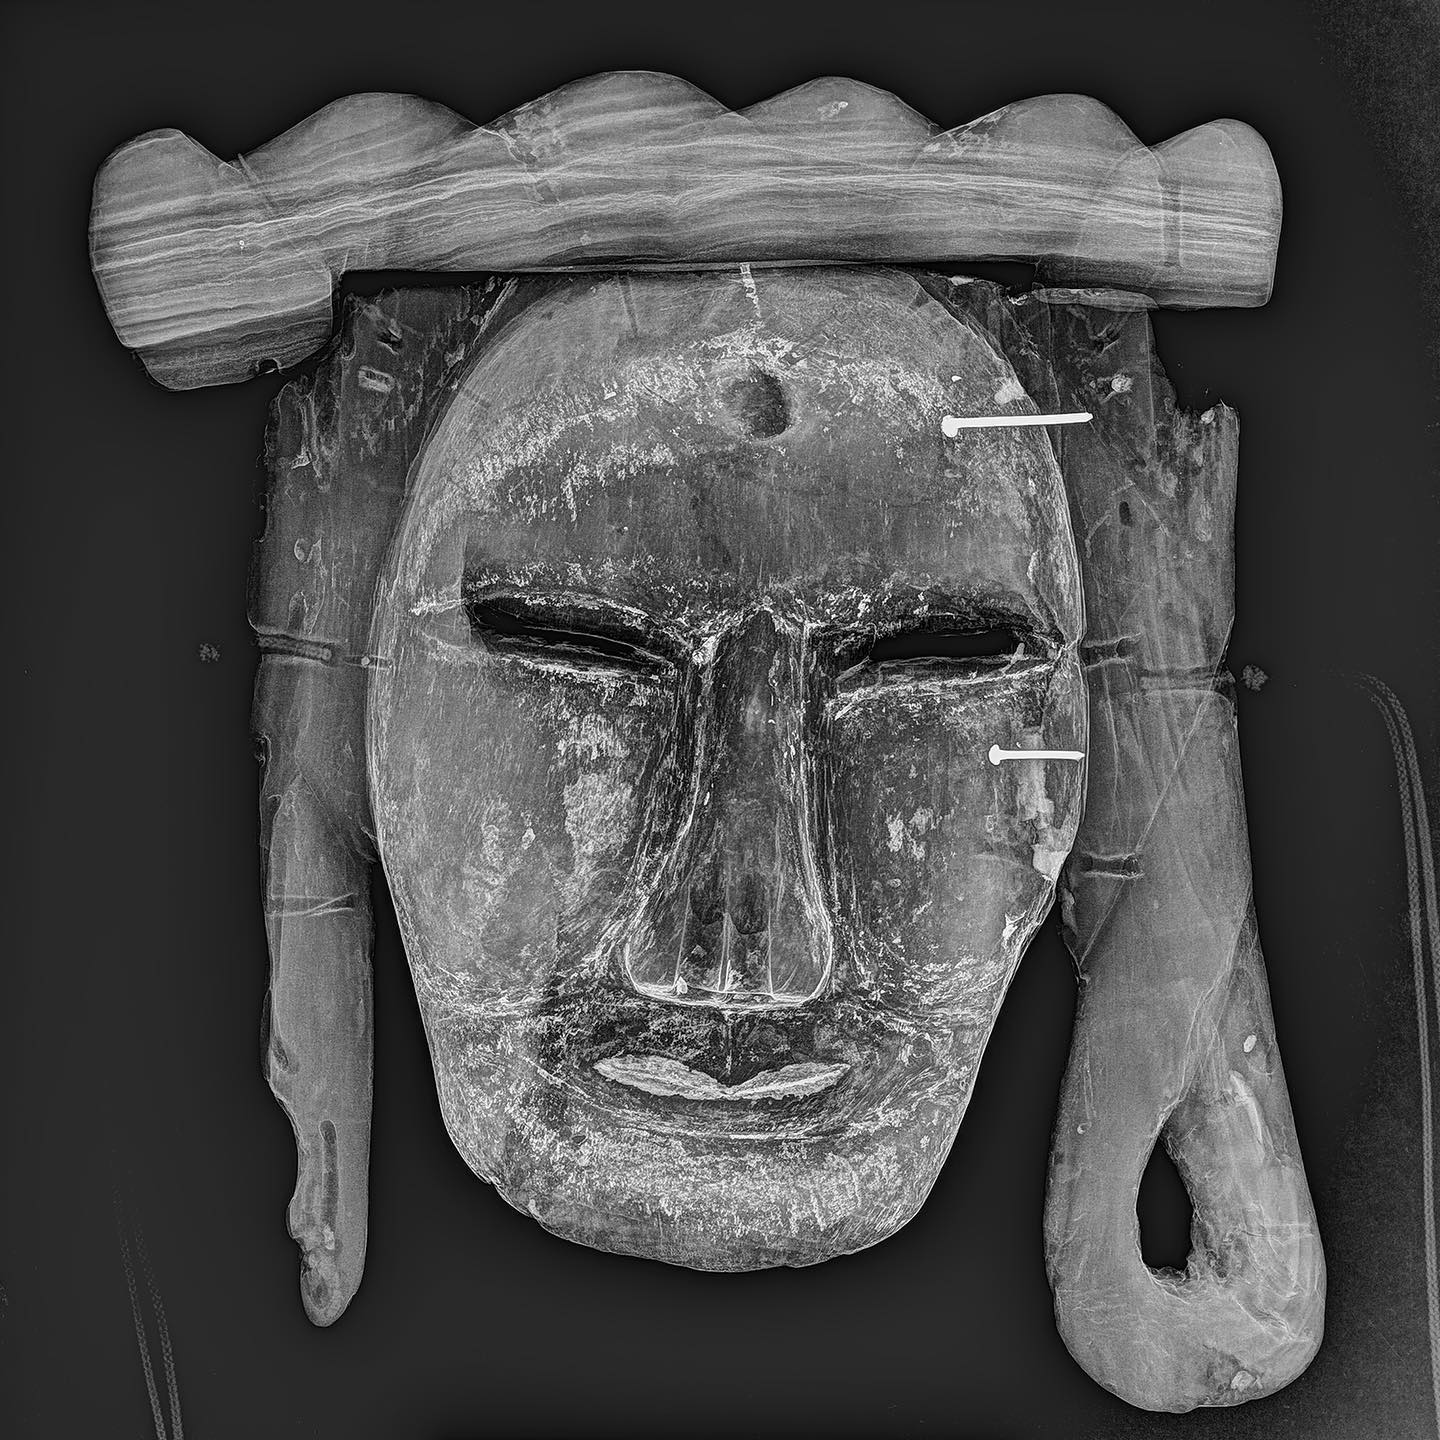 Scientific non-destructive testing on Hahoe masks and Byeongsan masks of Andong, national treasure 

Computed Radiography(CR) of the Gaksi mask

#korea #nrich #koreanheritage #kheritage #koreatreasure #korearesesarch #heritagekr #kculture

Copyright 2022. NRICH all rights reserved.